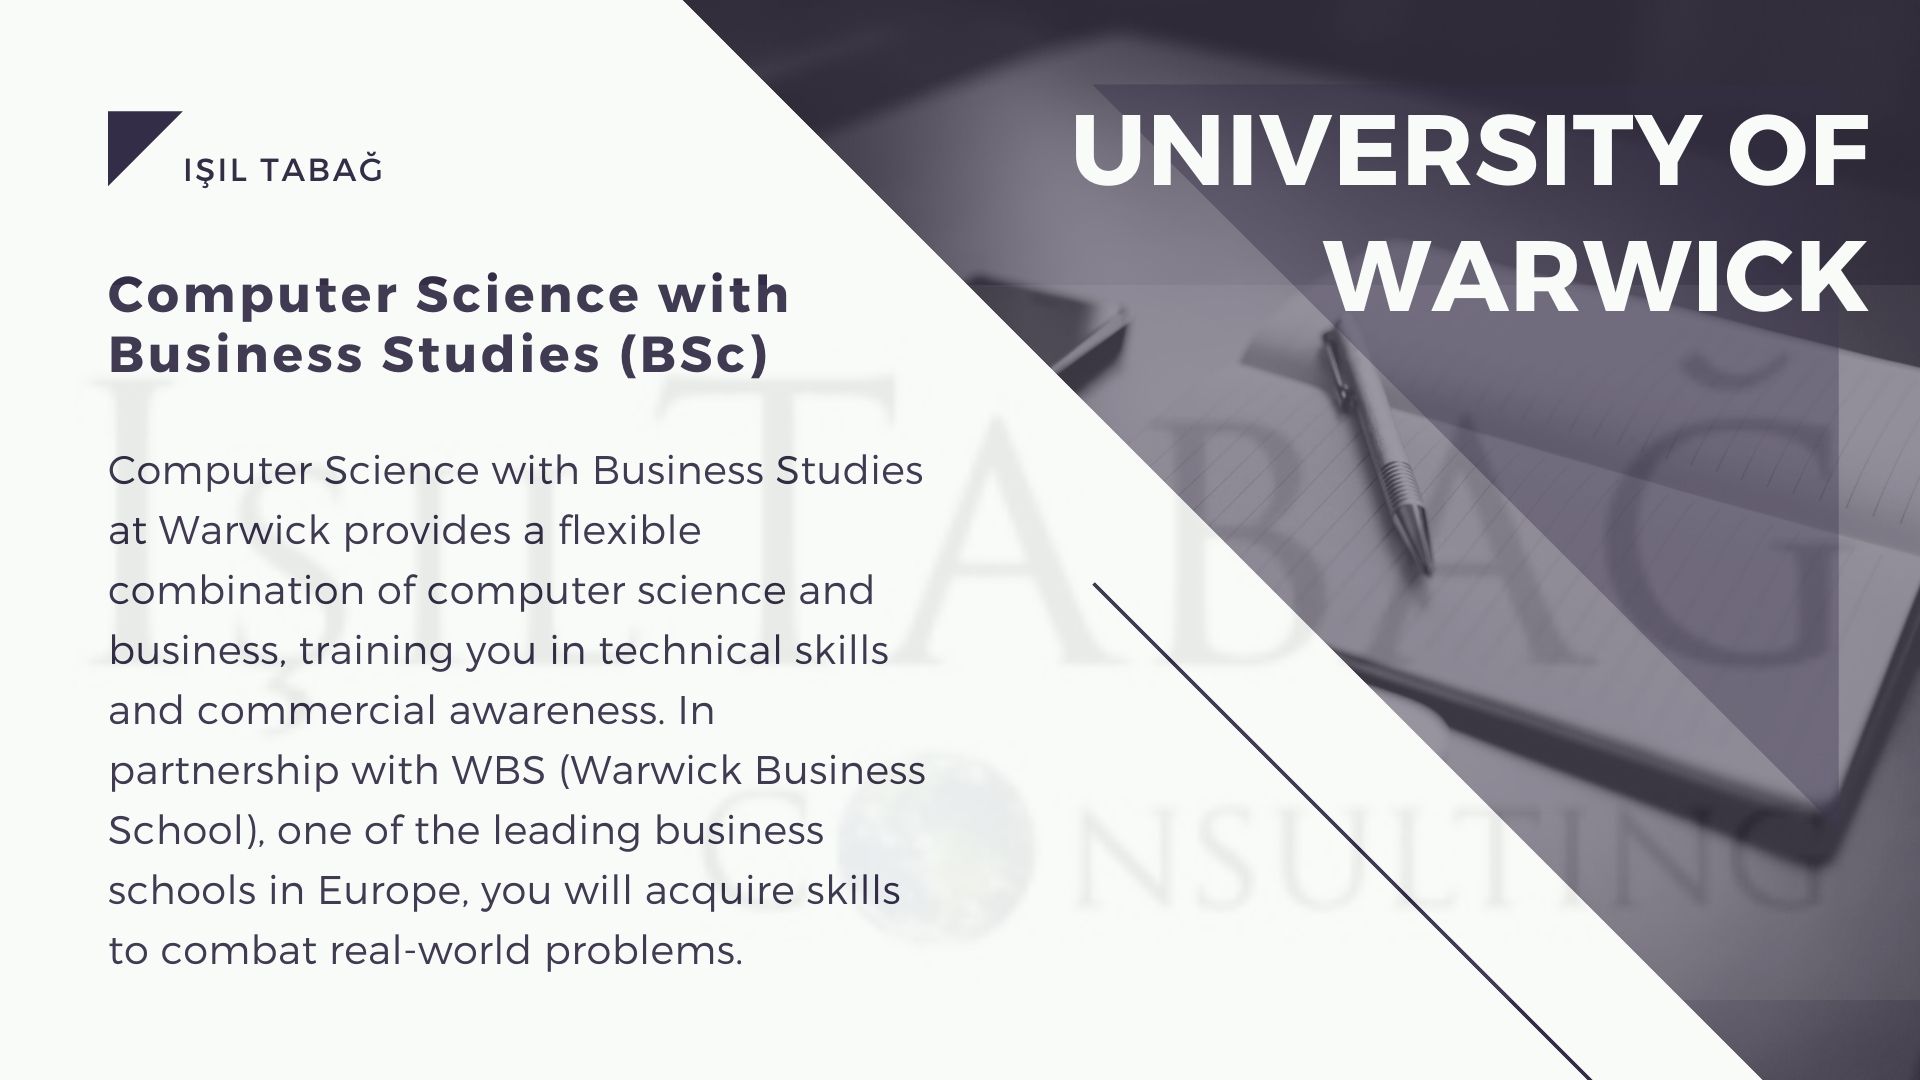 University of Warwick Computer Science with Business Studies UK - Isil Tabag